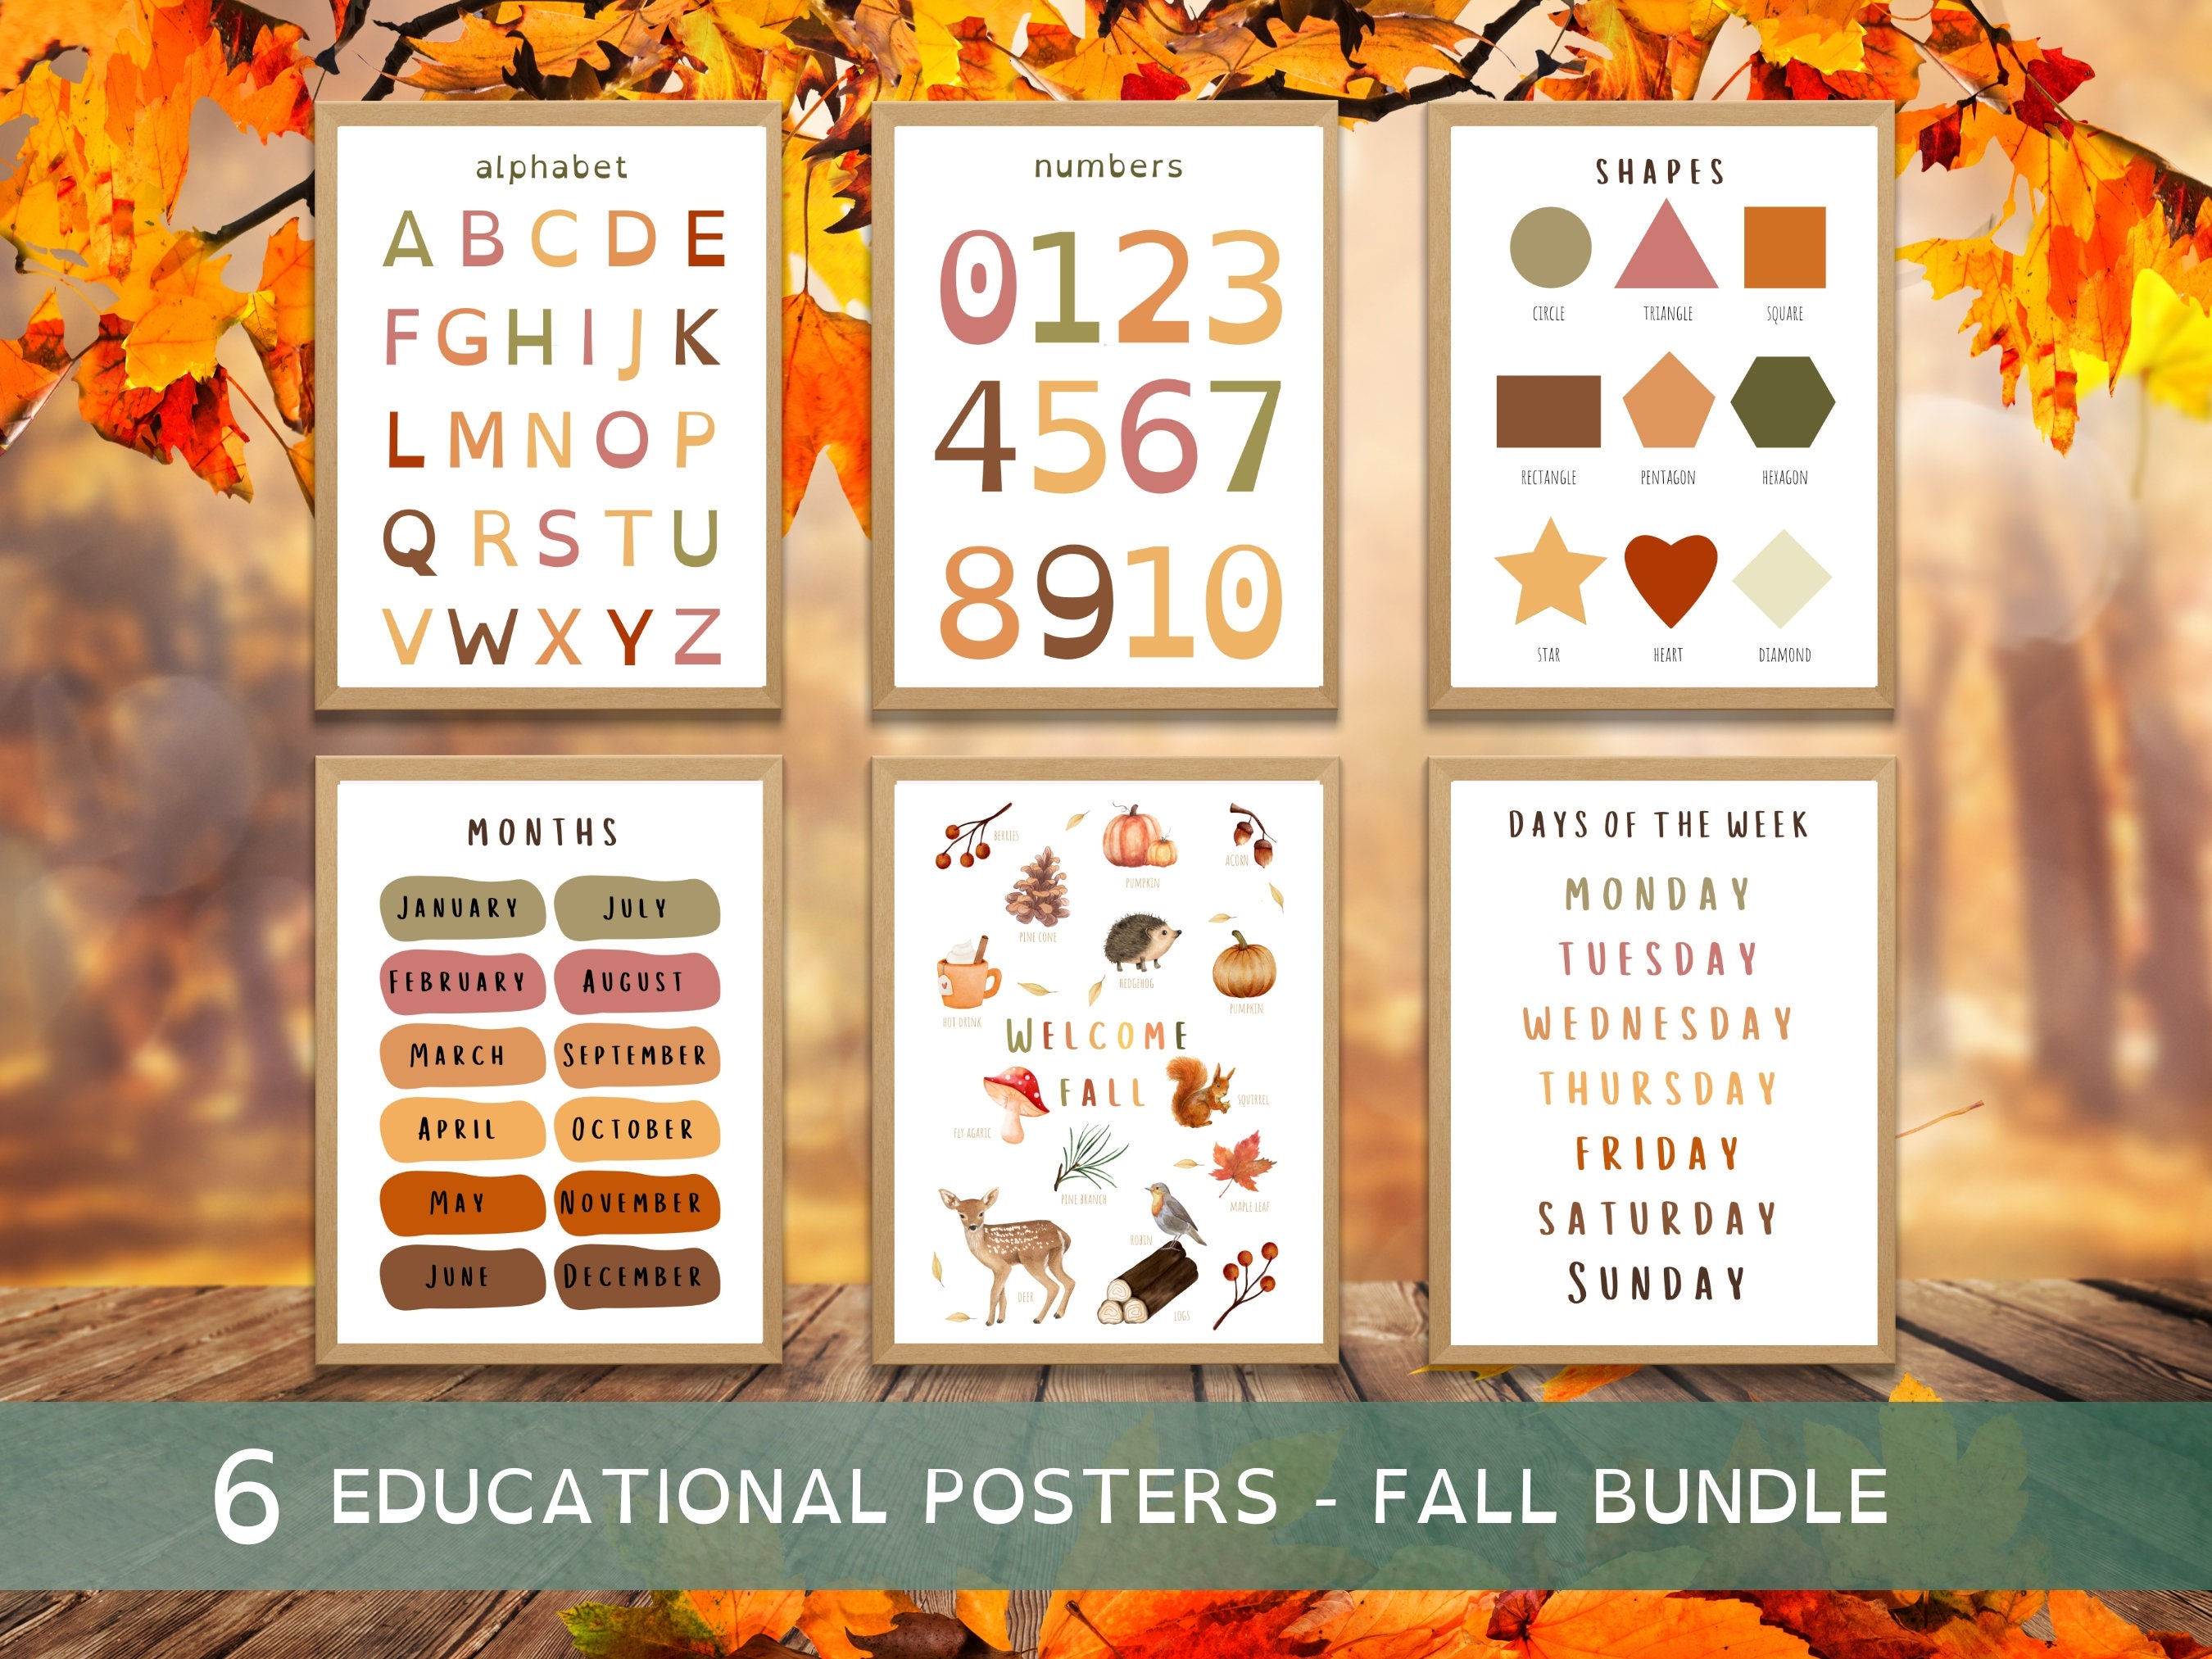 Autumn is Here! - Seasonal Decor with Fall-Themed Poster Art